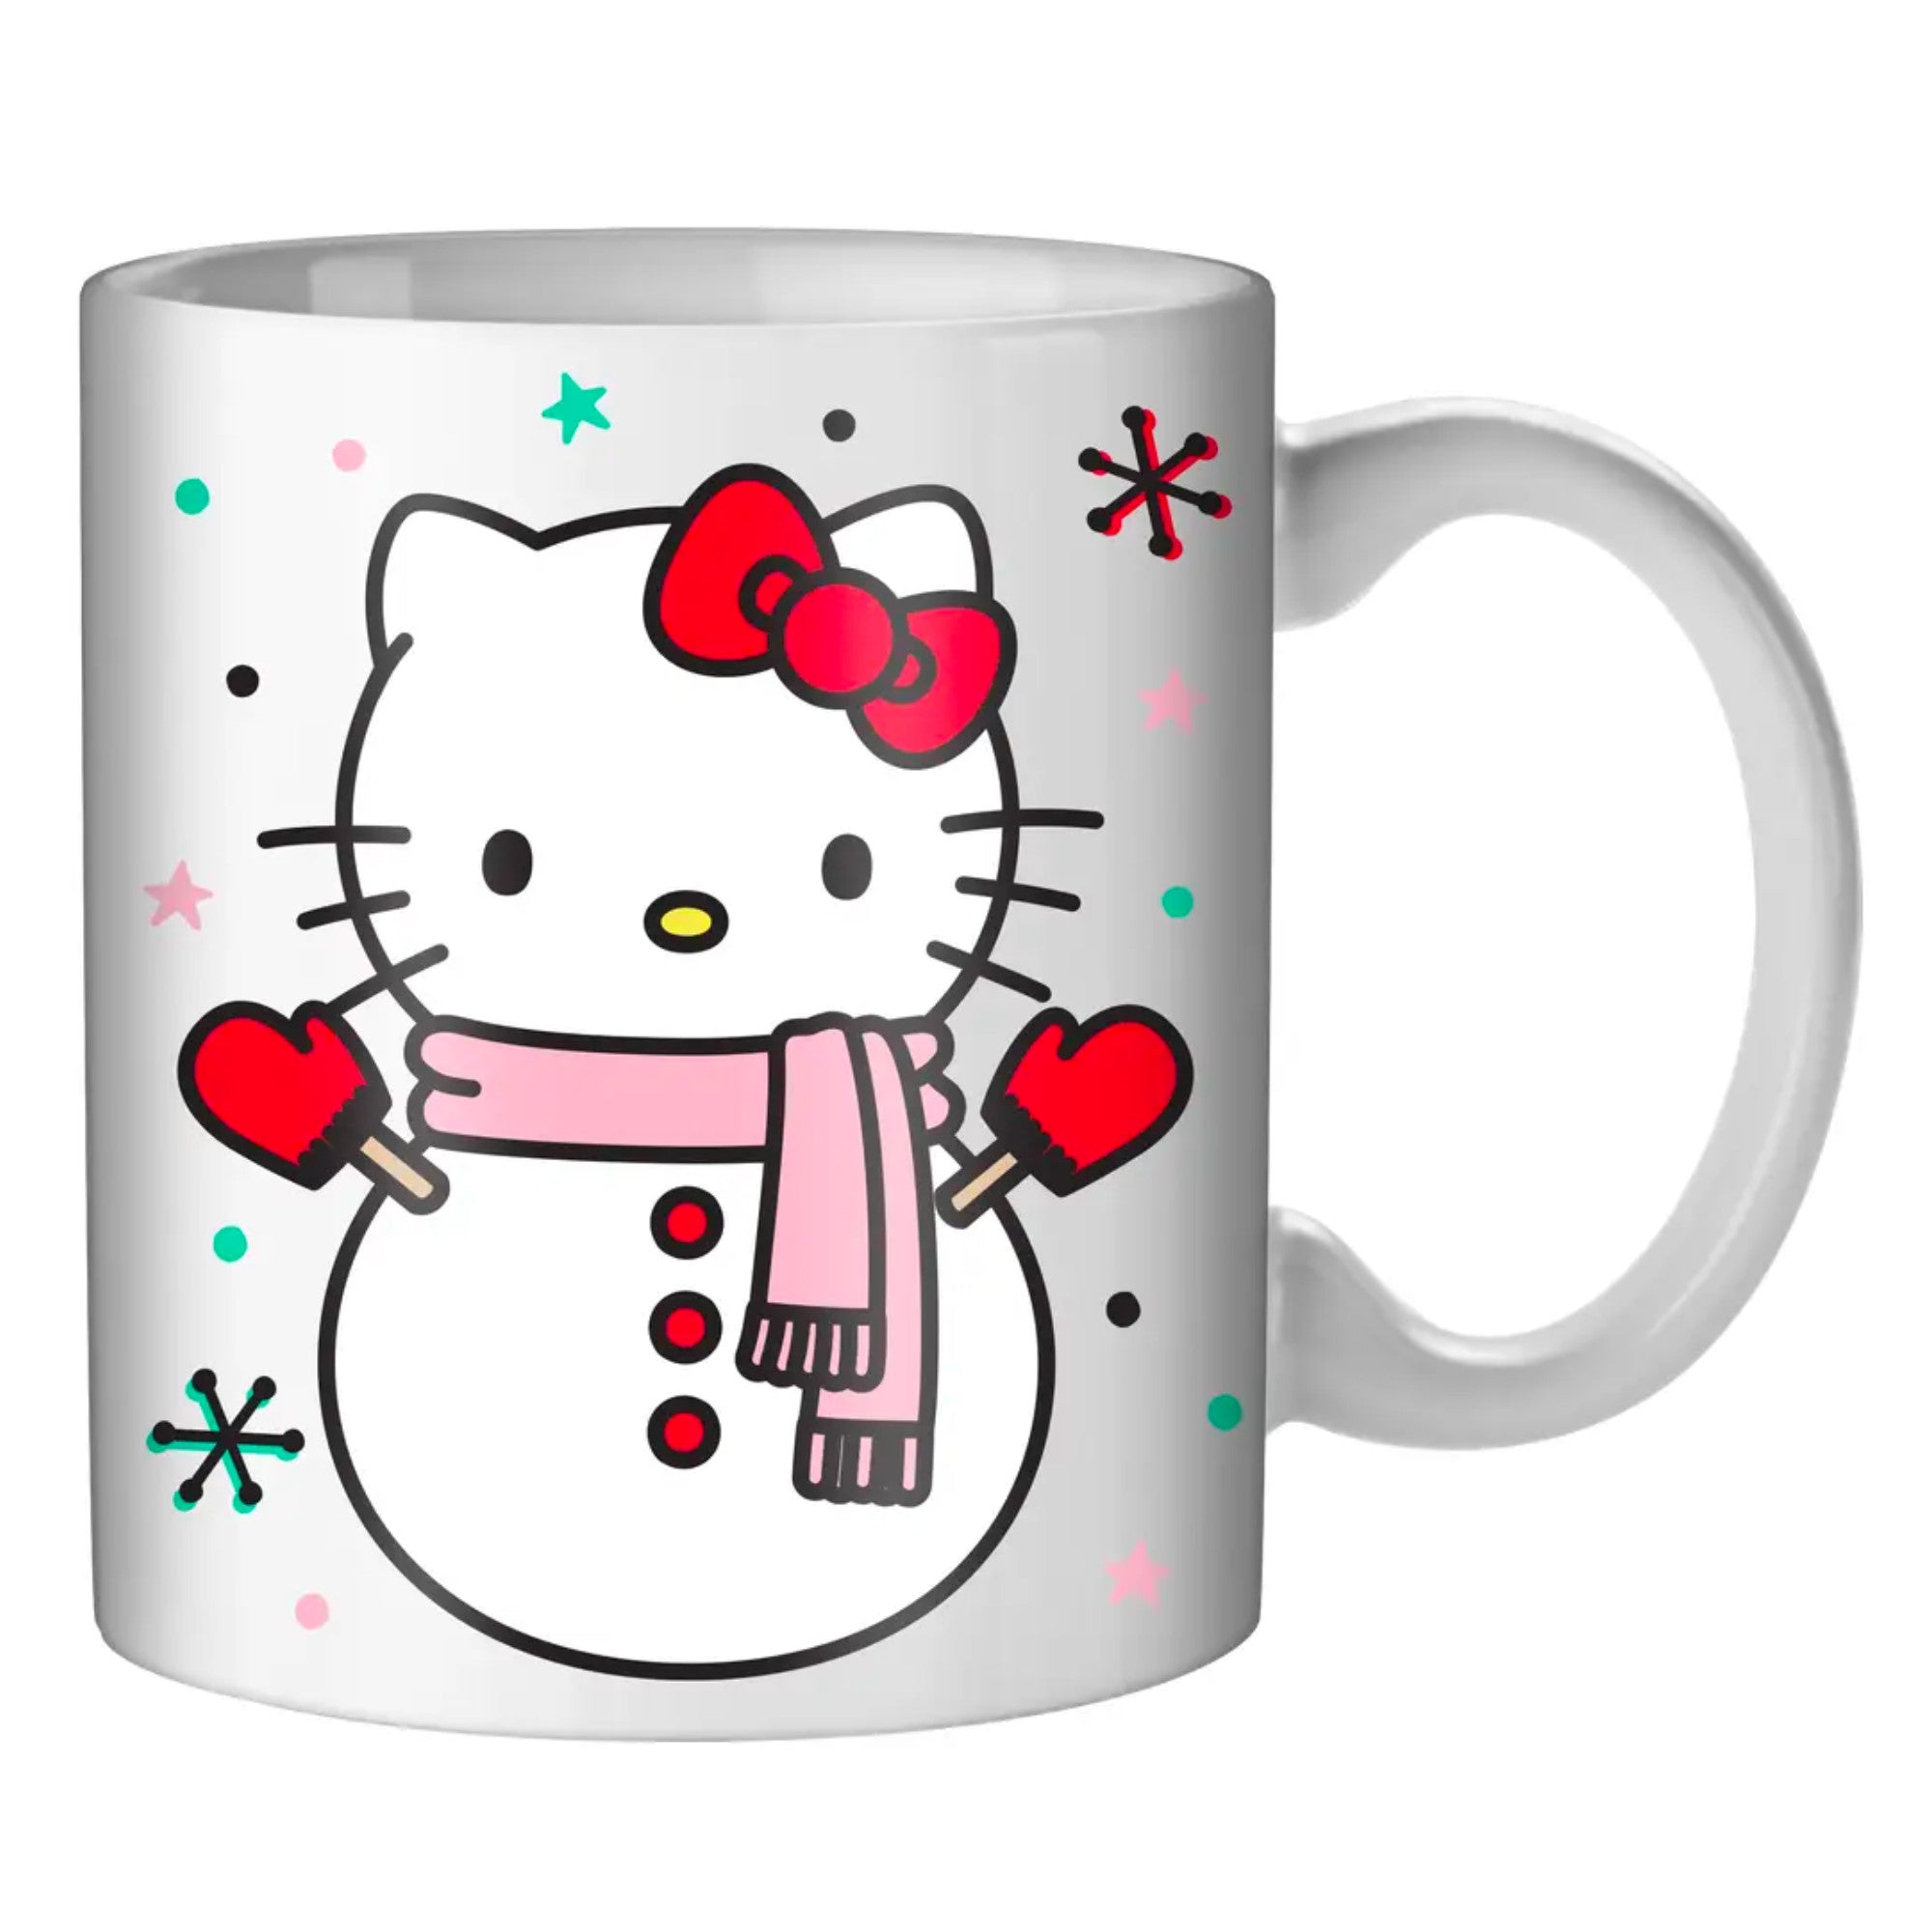 Hellokitty Large Capacity Insulated Cup With Gift Box, Christmas